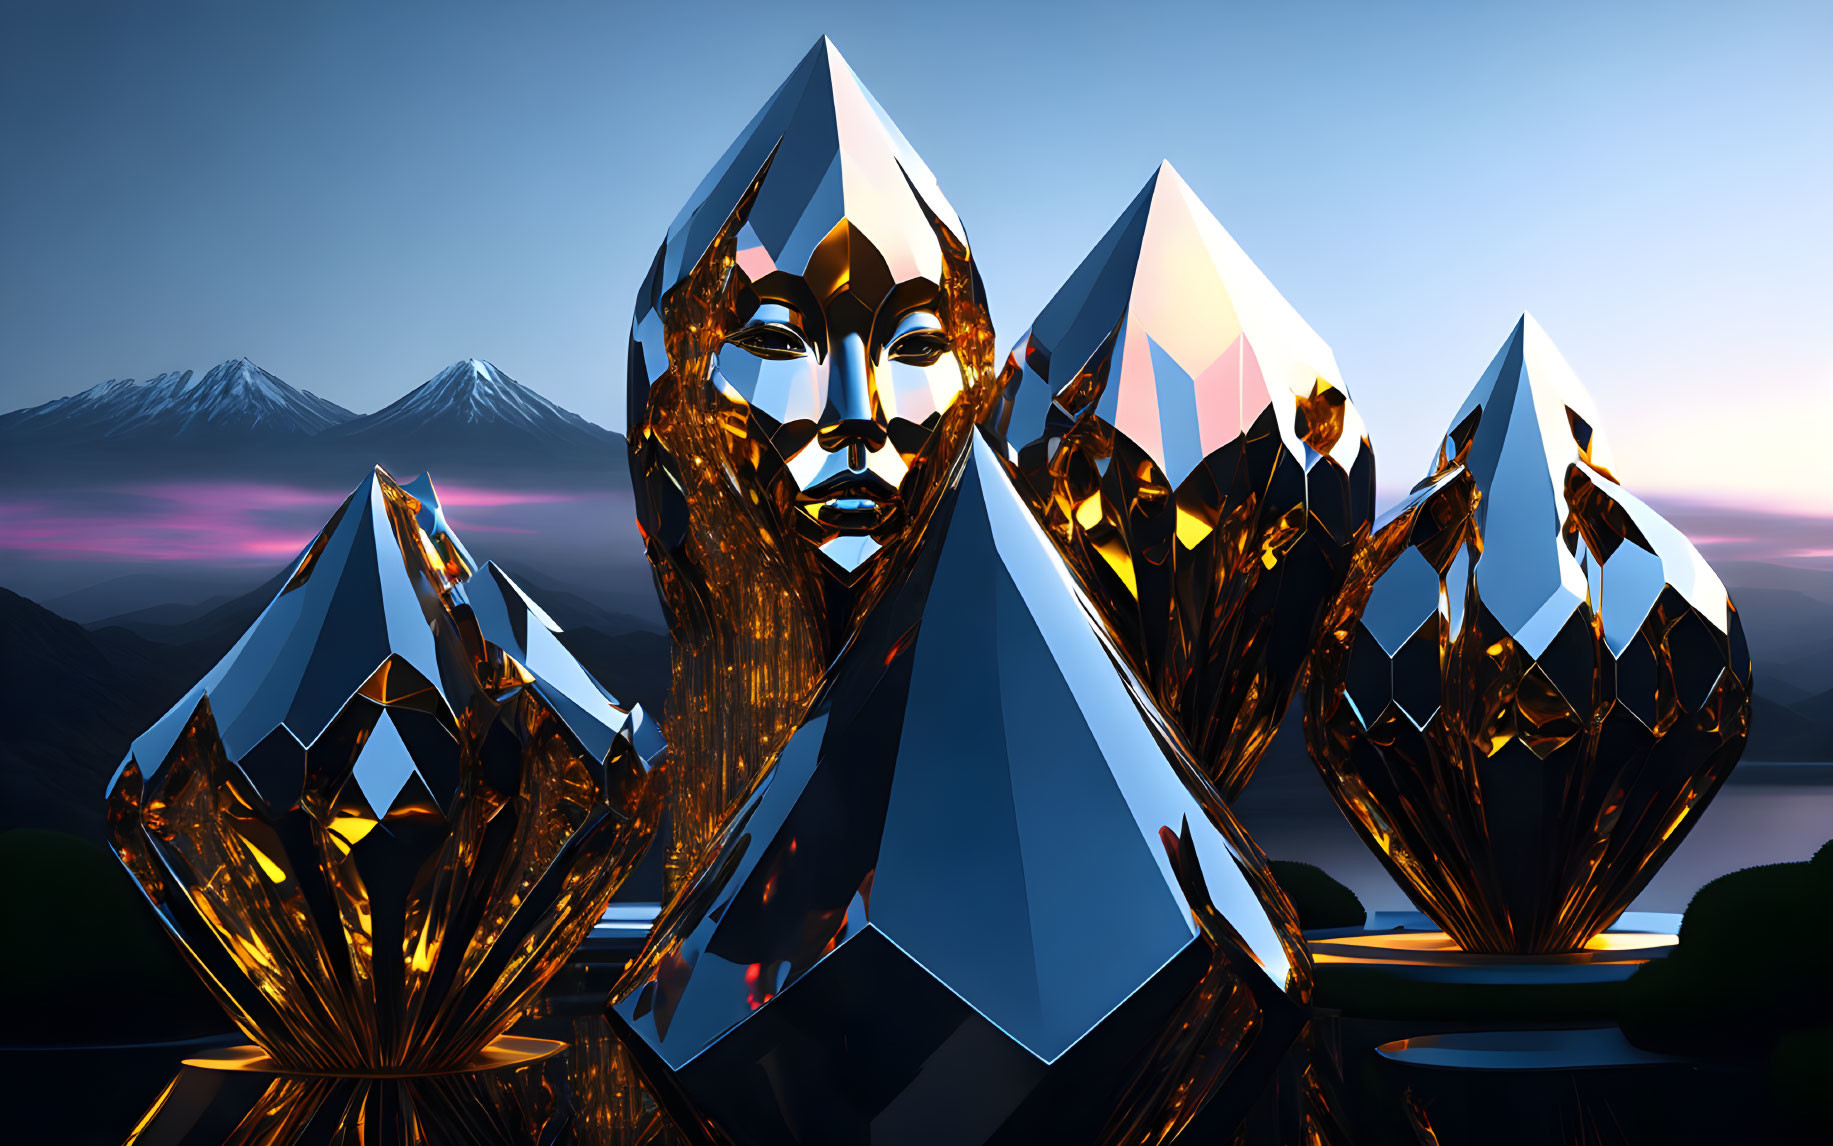 Futuristic crystal sculptures featuring human faces in mountain landscape